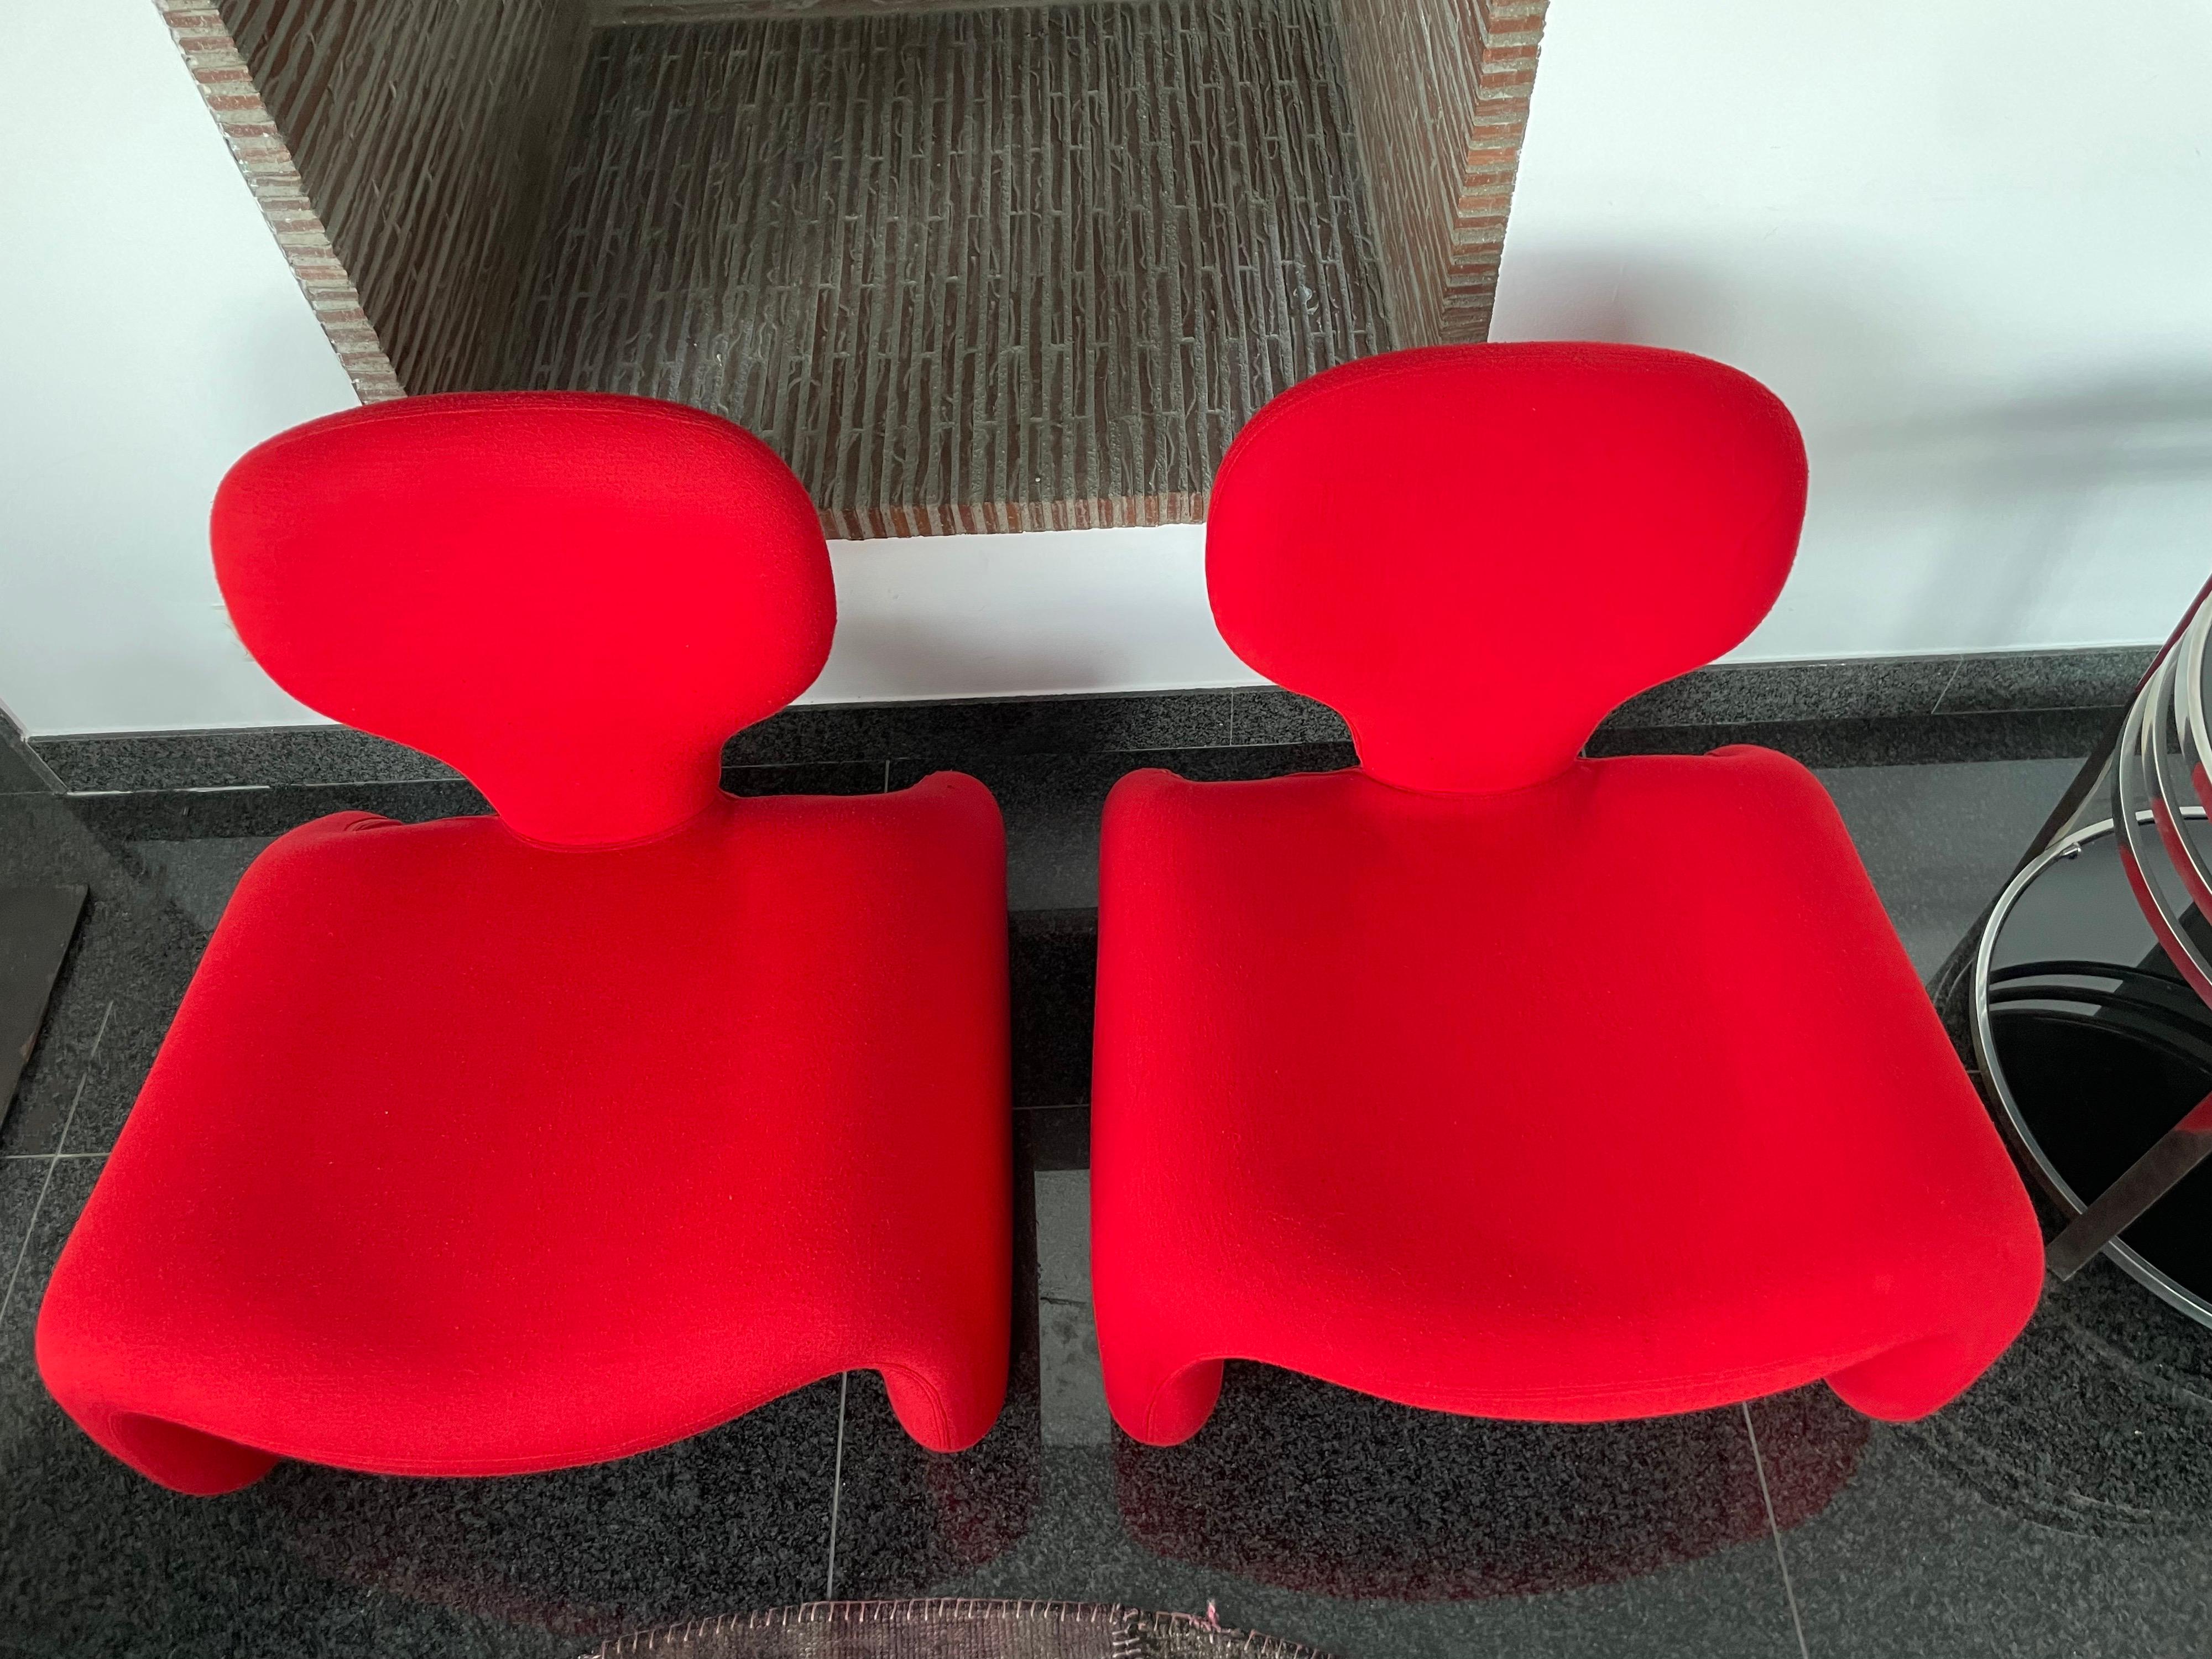 Pair of vintage Djinn chairs, designed by Olivier Mourgue for Airborne International in the 1960s.
The futurist chair became an icon after Stanley Kubrick featured it in his movie « 2001: à space odyssey »

The chairs are in excellent condition,